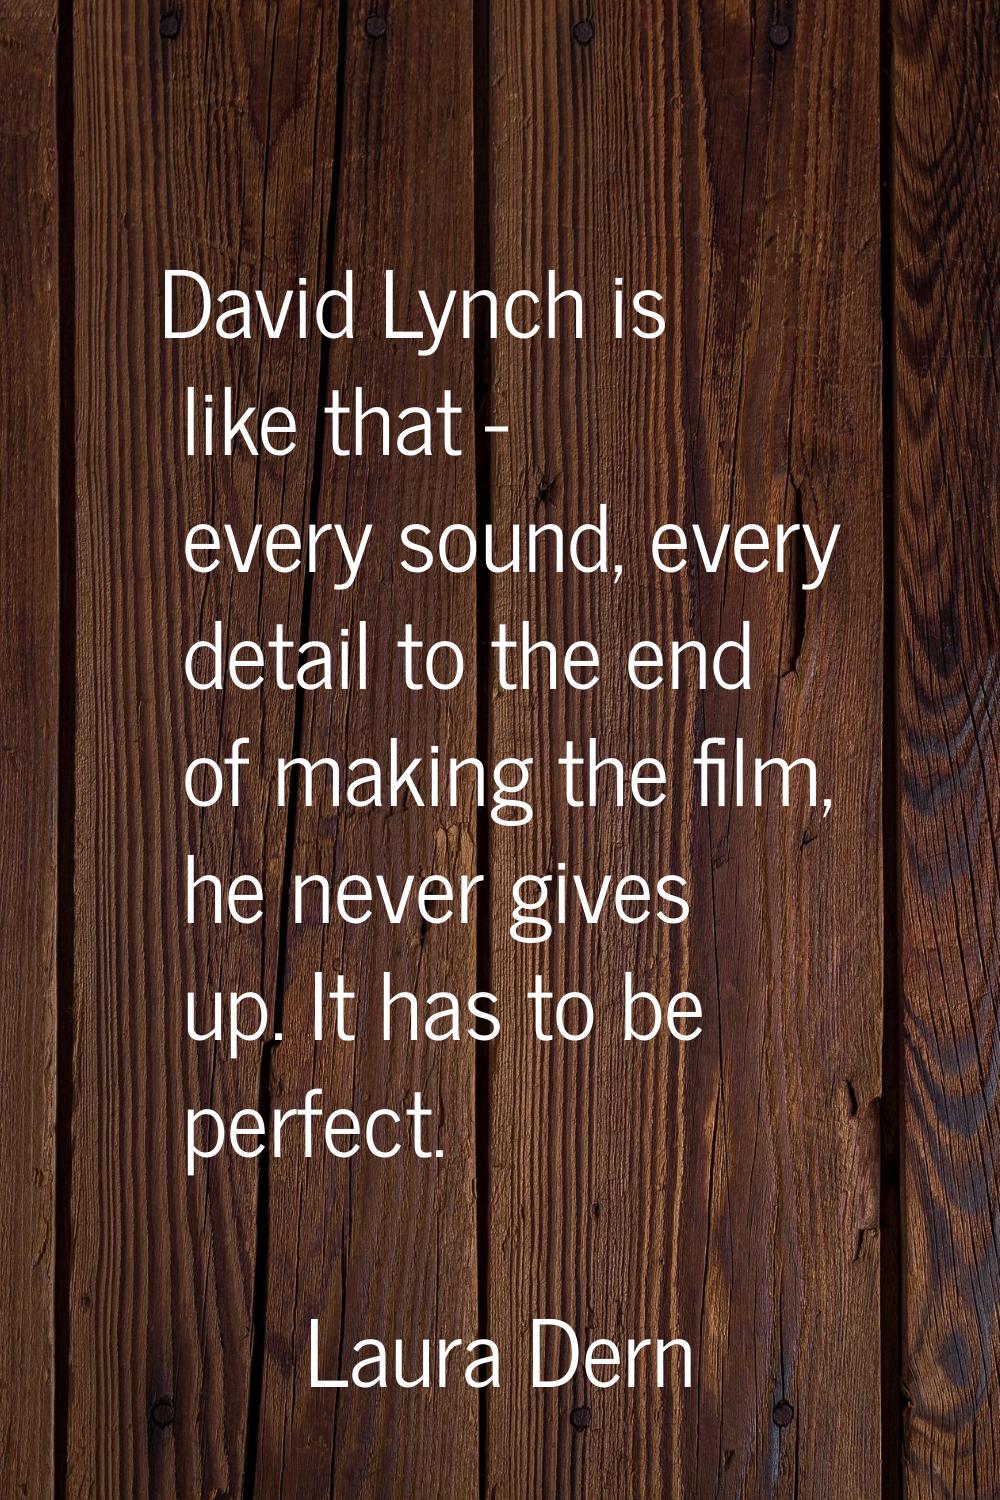 David Lynch is like that - every sound, every detail to the end of making the film, he never gives 